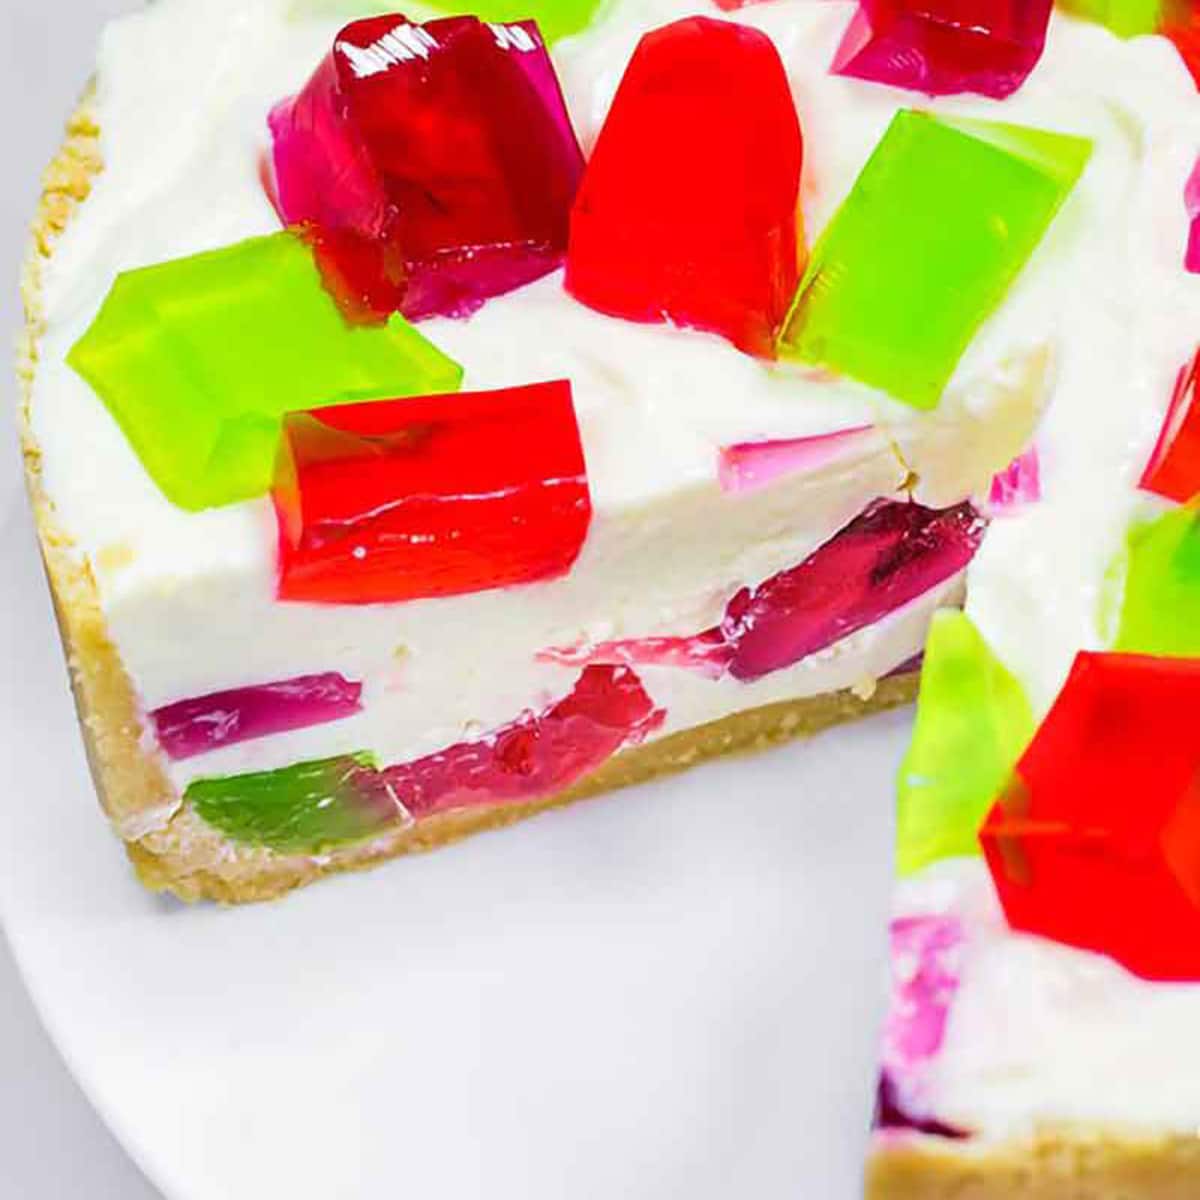 Keto jello cake with a slice missing on a plate.